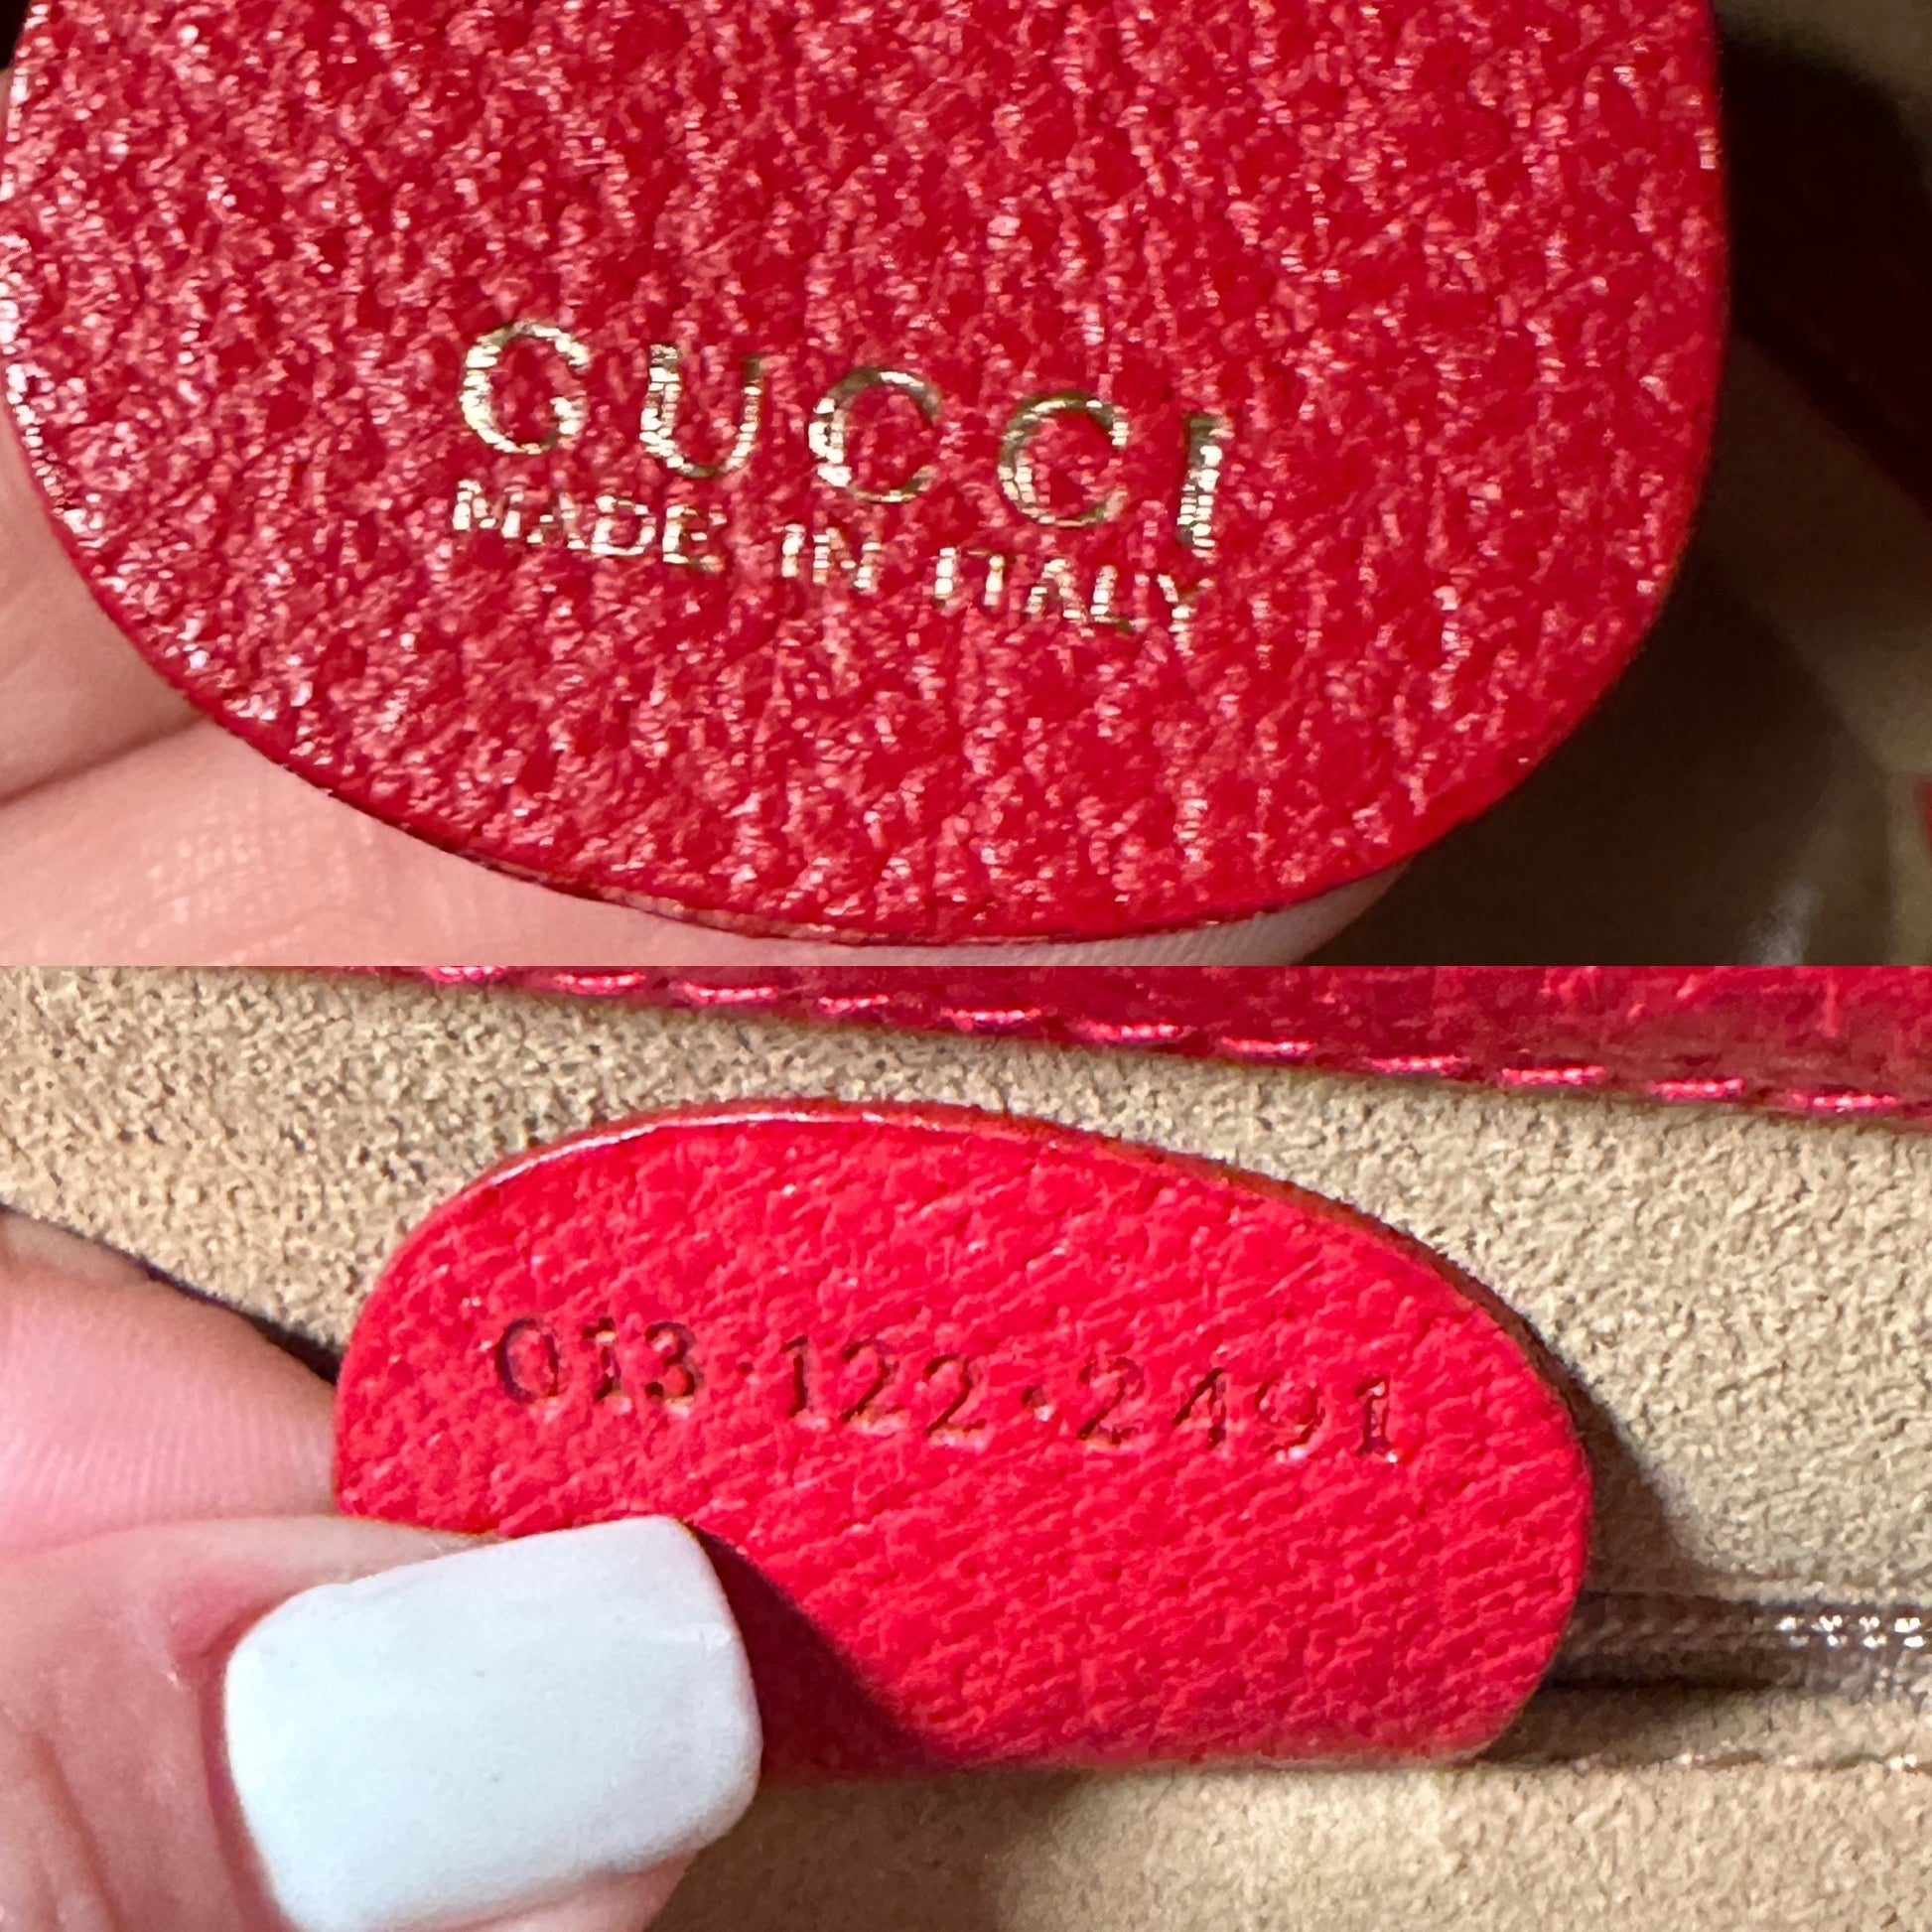 GUCCI VINTAGE 100% Authentic Genuine Leather Bamboo Crossbody Makeup Vanity Case Bag, Red, 1990's, Great Condition, Dust Bag Included